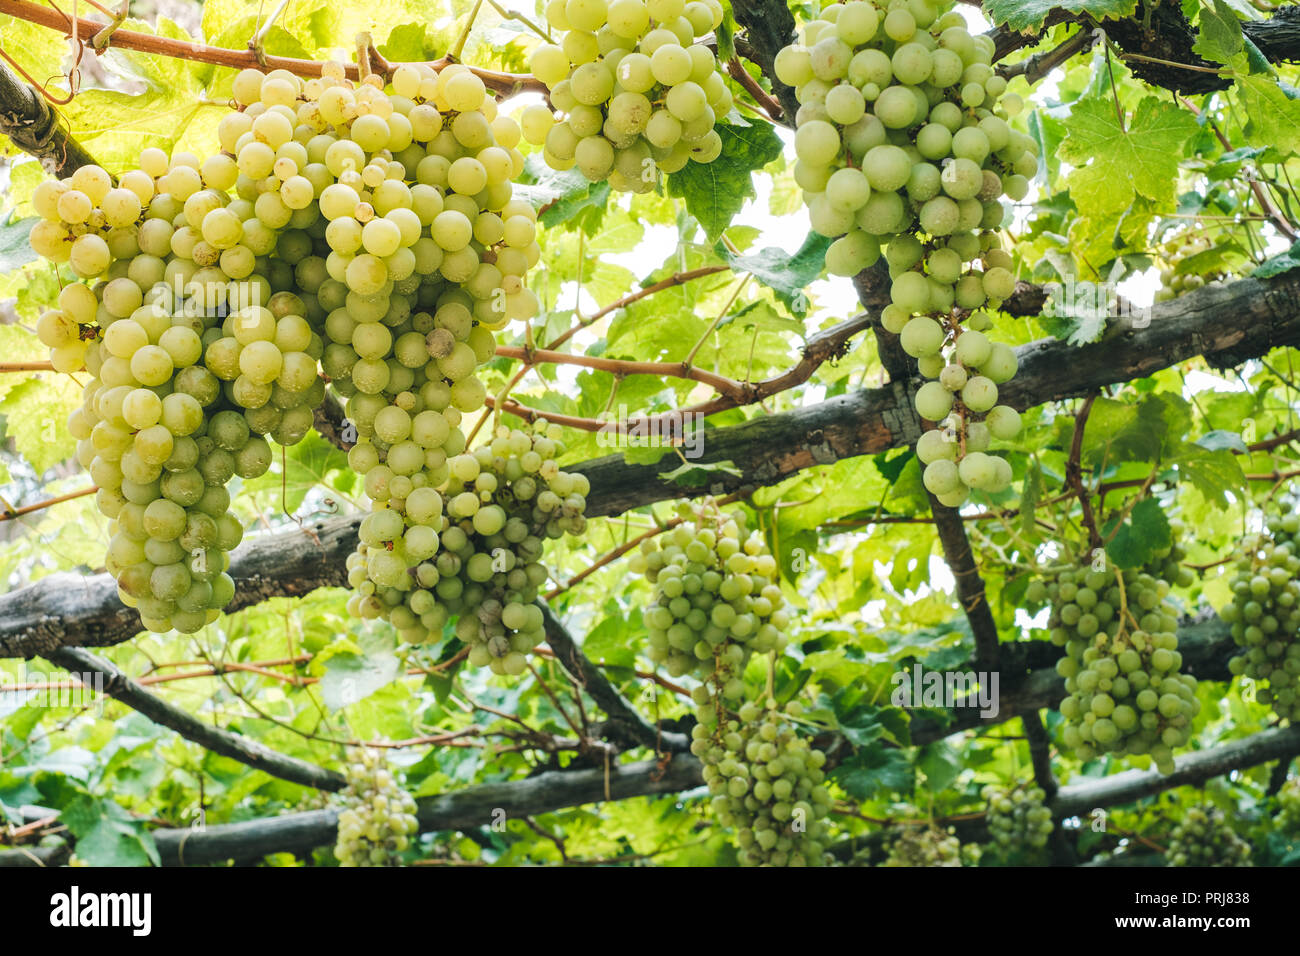 Ripe green clusters of grapes hanging in a rural garden in the sun Stock Photo